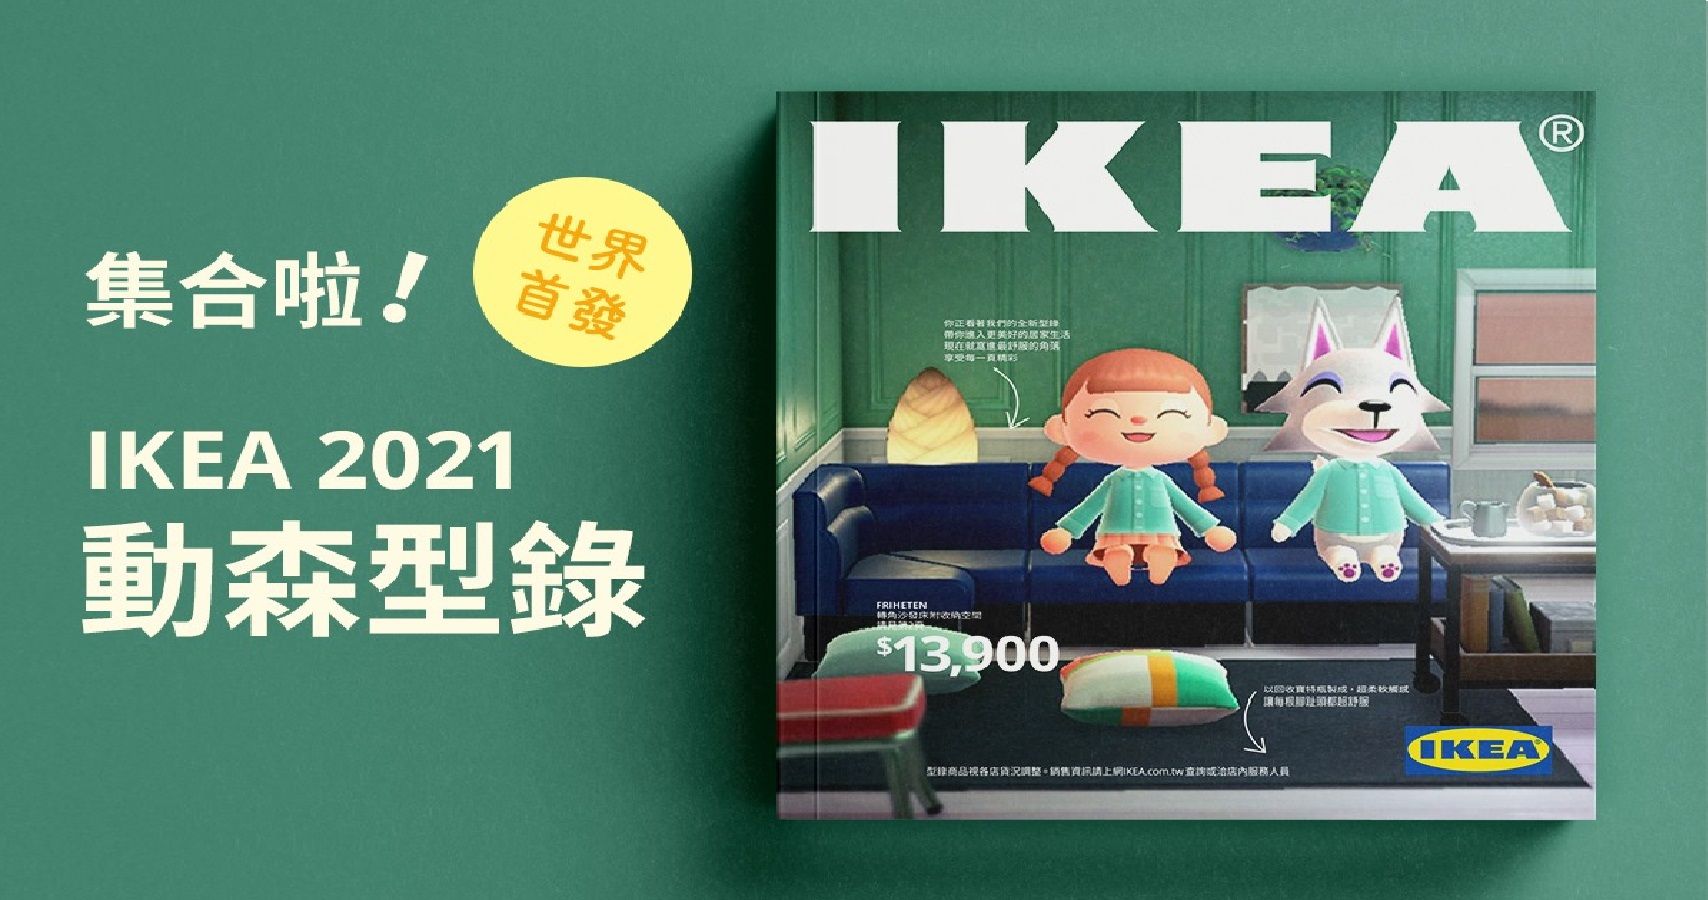 IKEA Has Created An Entire Catalog With Animal Crossing New Horizons Furniture